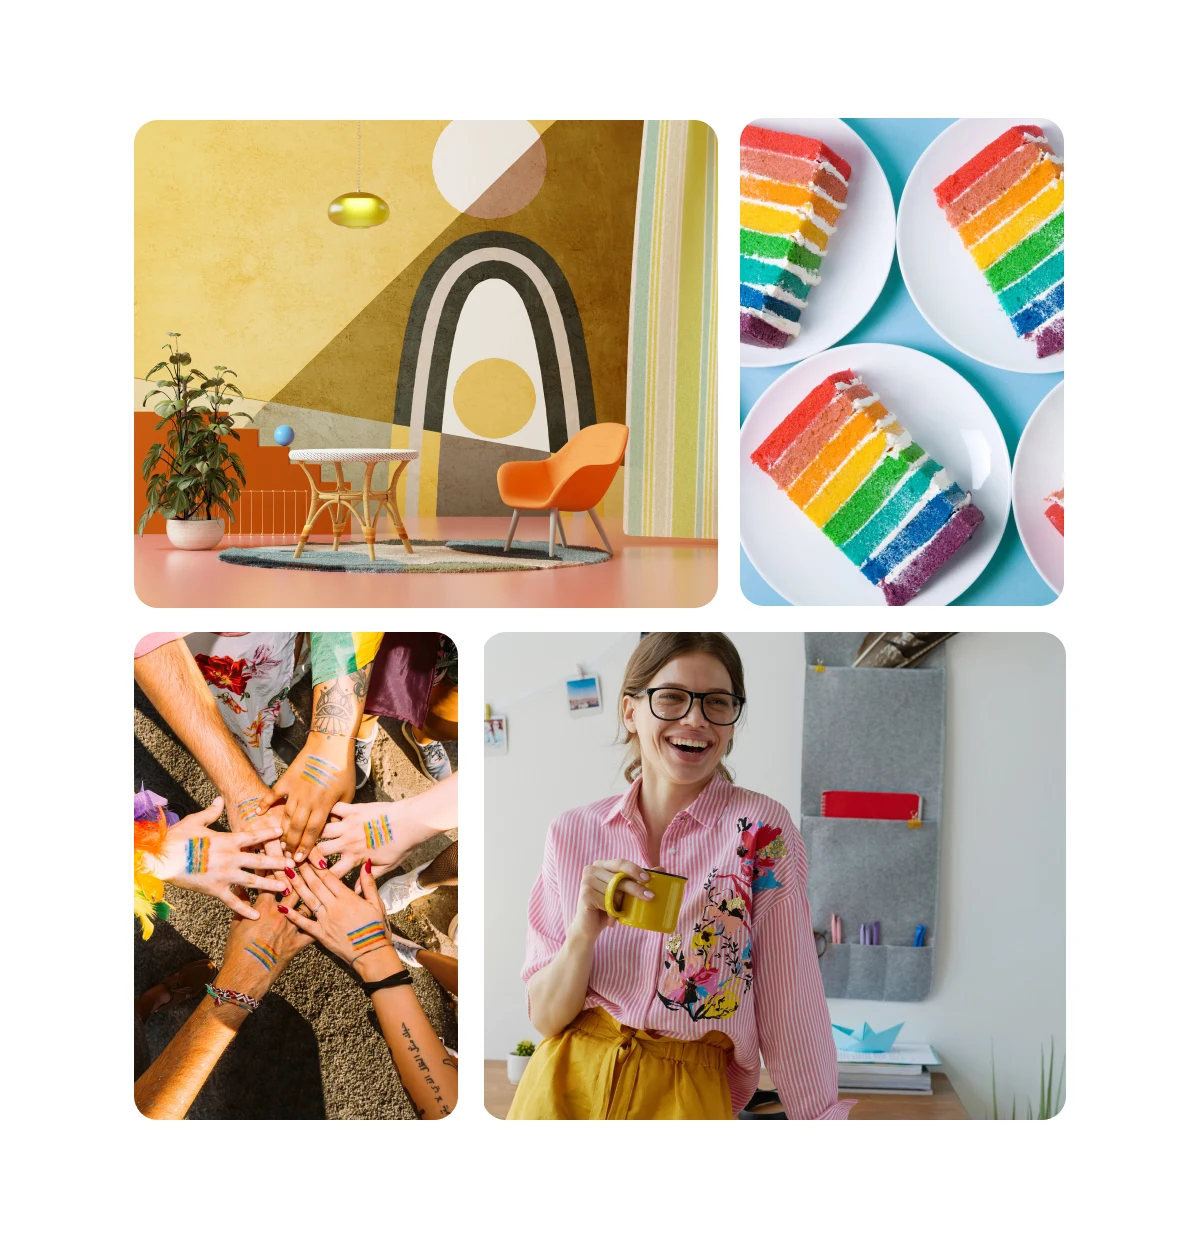 Pin grid featuring maximalist home decor, rainbow cake slides, pile of hands celebrating Pride, woman wearing a colorful work outfit.